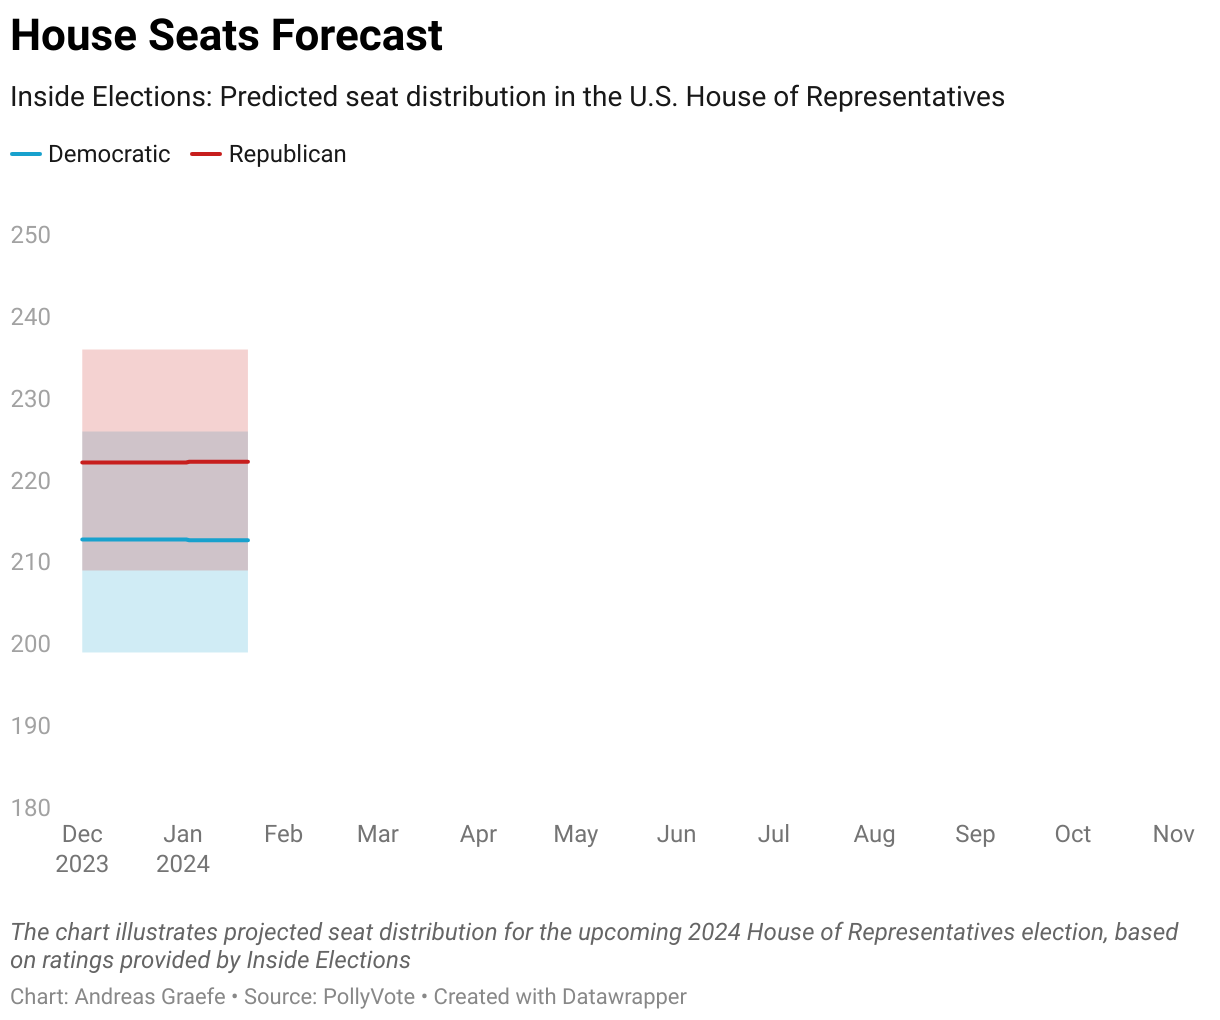 The chart illustrates projected seat distribution for the upcoming 2024 House of Representatives election, based on ratings provided by Inside Elections